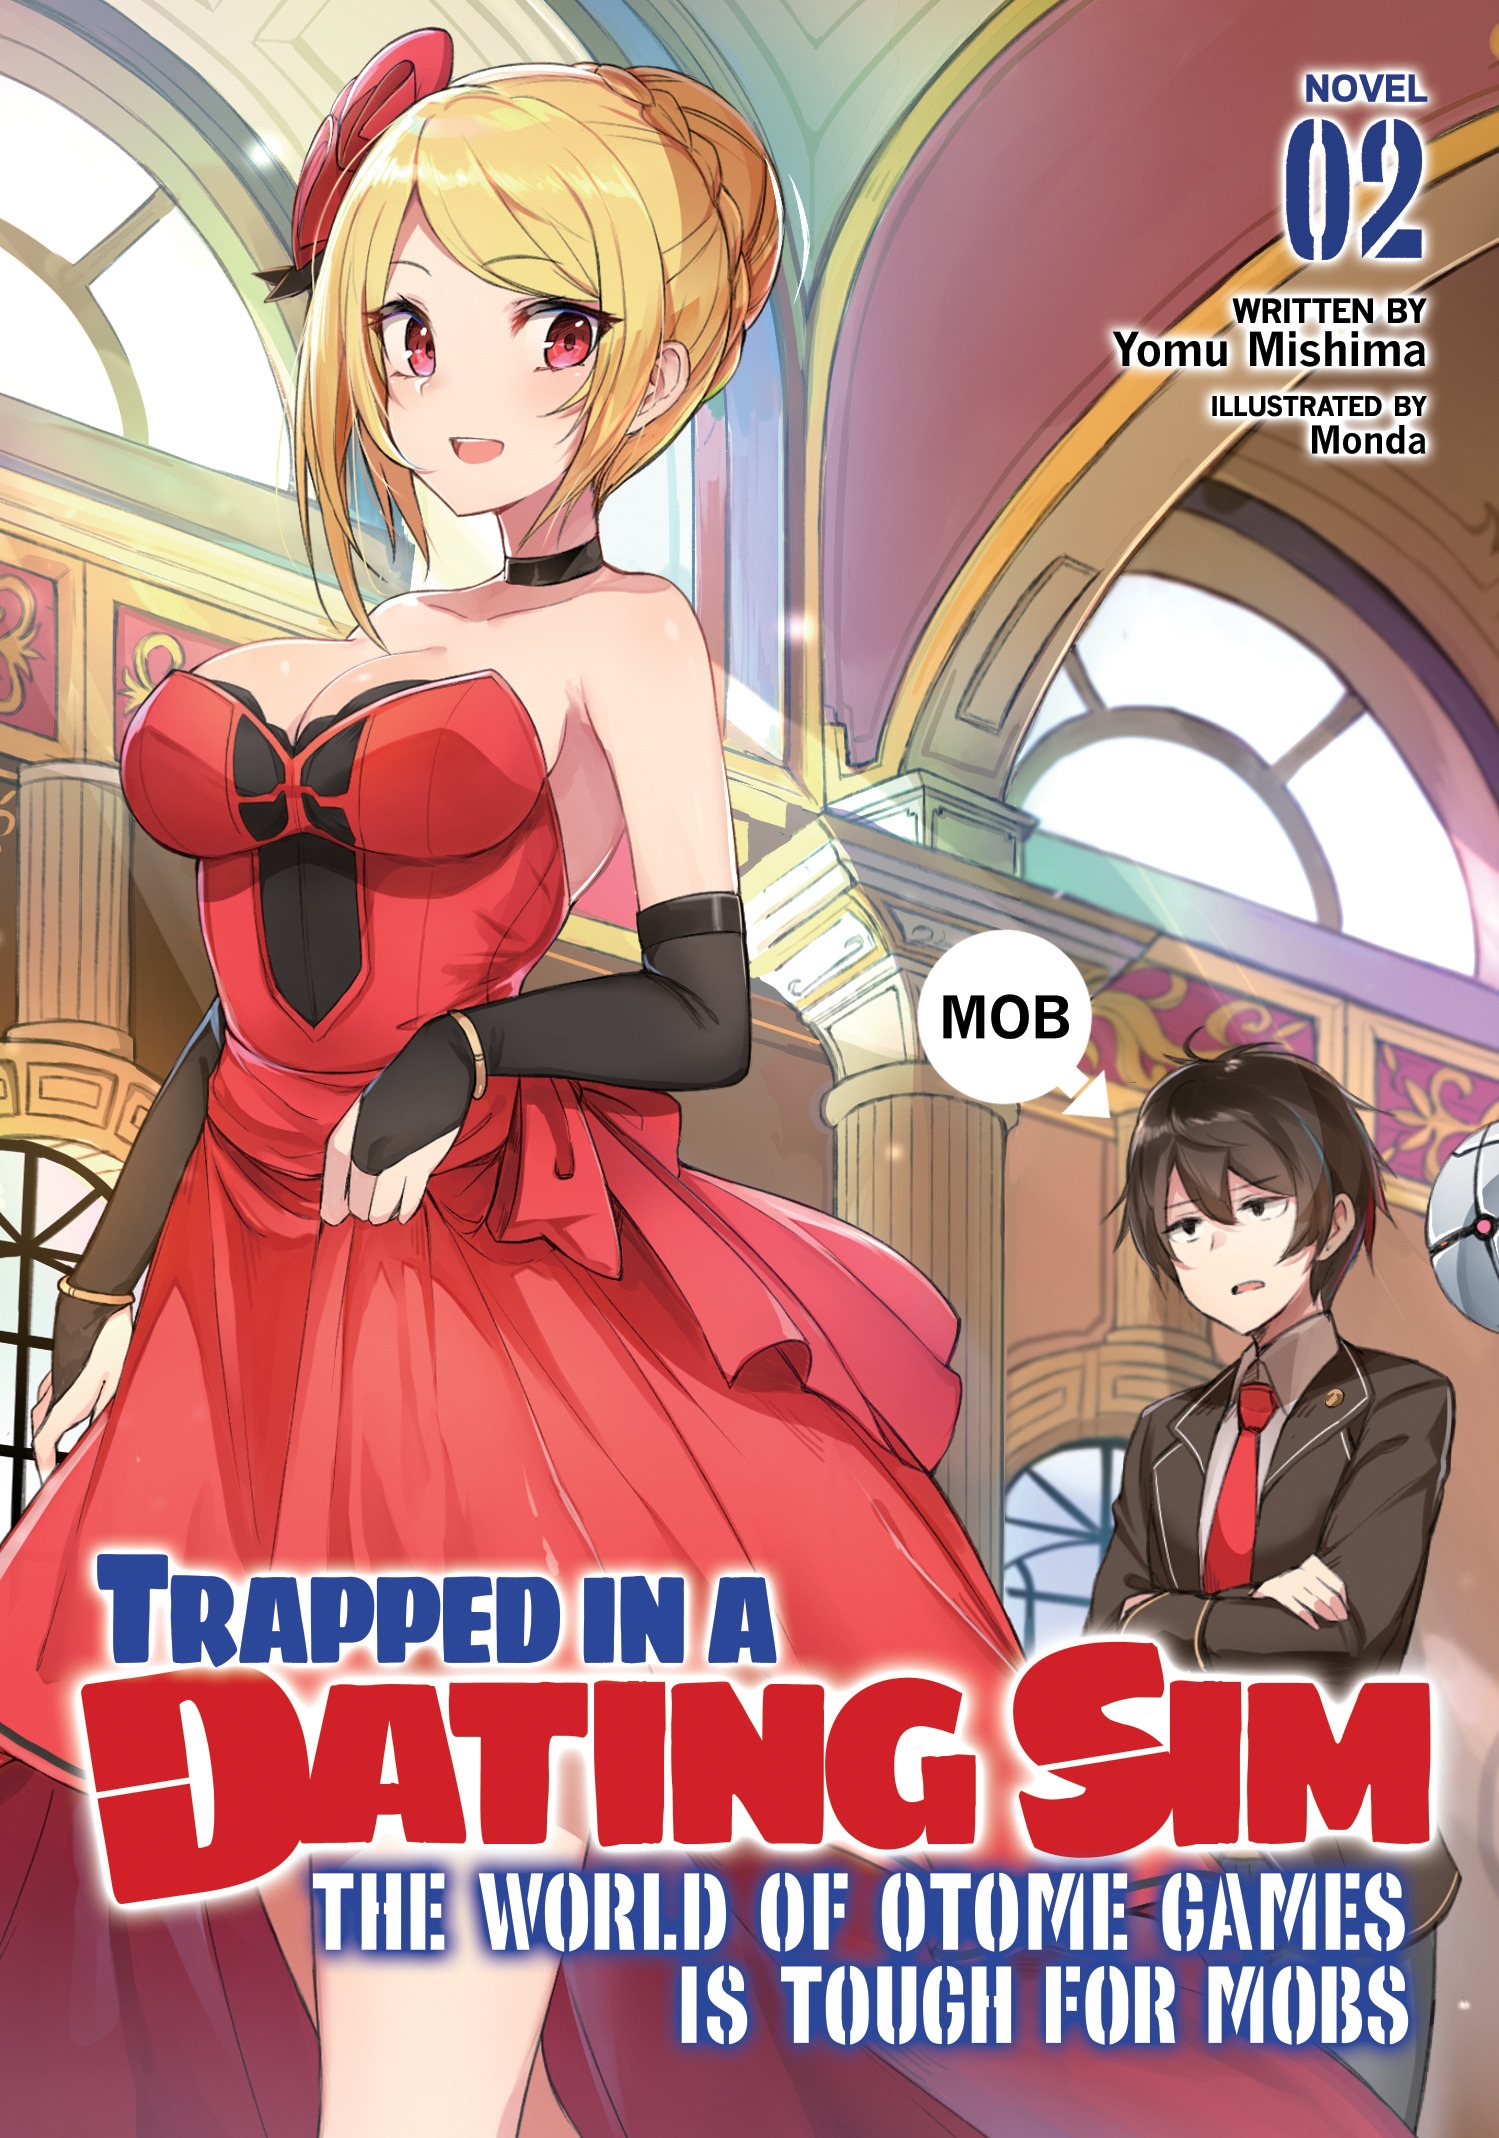 Buy Trapped in a Dating Sim The World of Otome Games is Tough for Mobs  Manga Vol 3 by Yomu Mishima With Free Delivery  worderycom